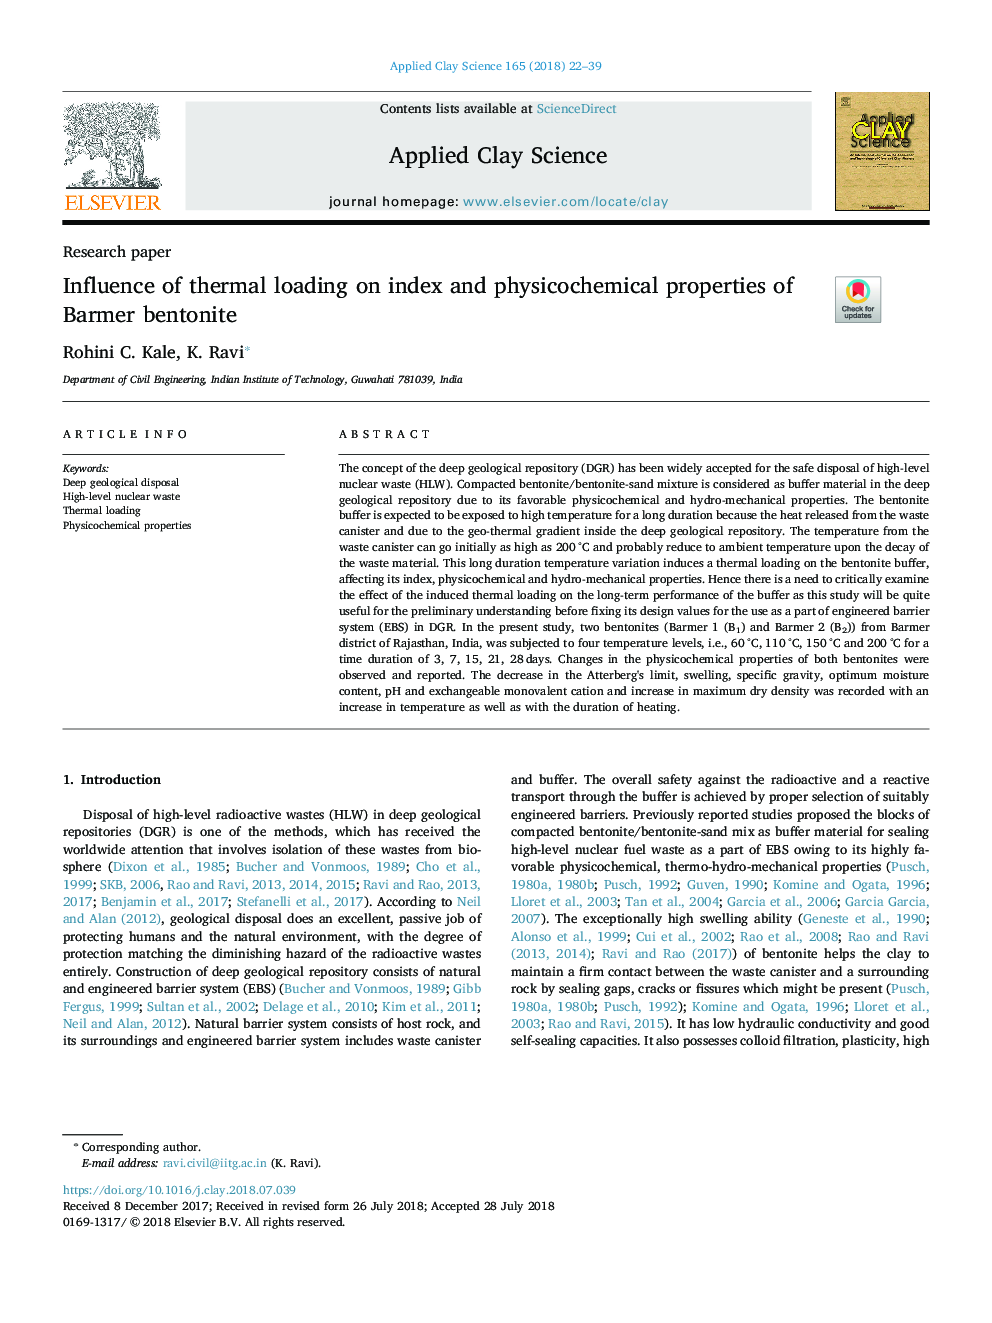 Influence of thermal loading on index and physicochemical properties of Barmer bentonite